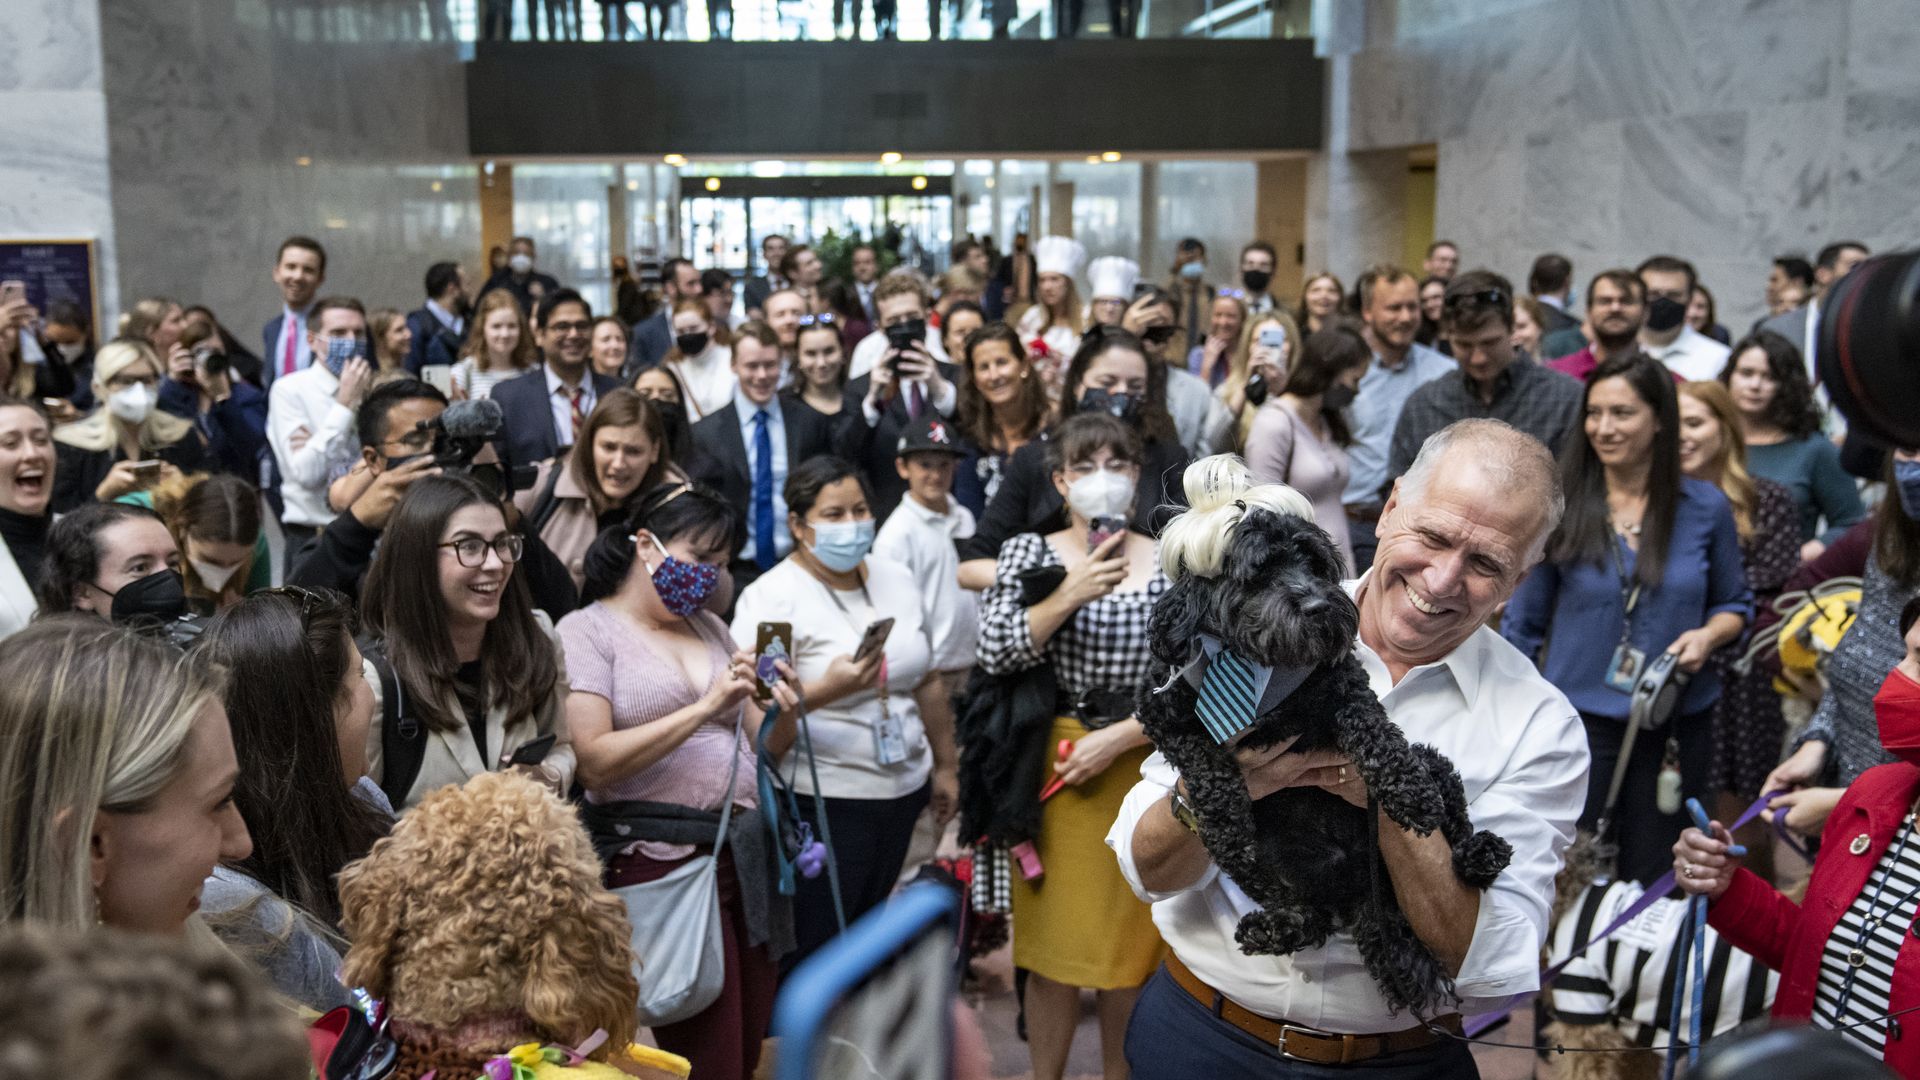 Sen. Thom Tillis is seen holding a dog during a pet Halloween parade in the Hart Senate Office Building.